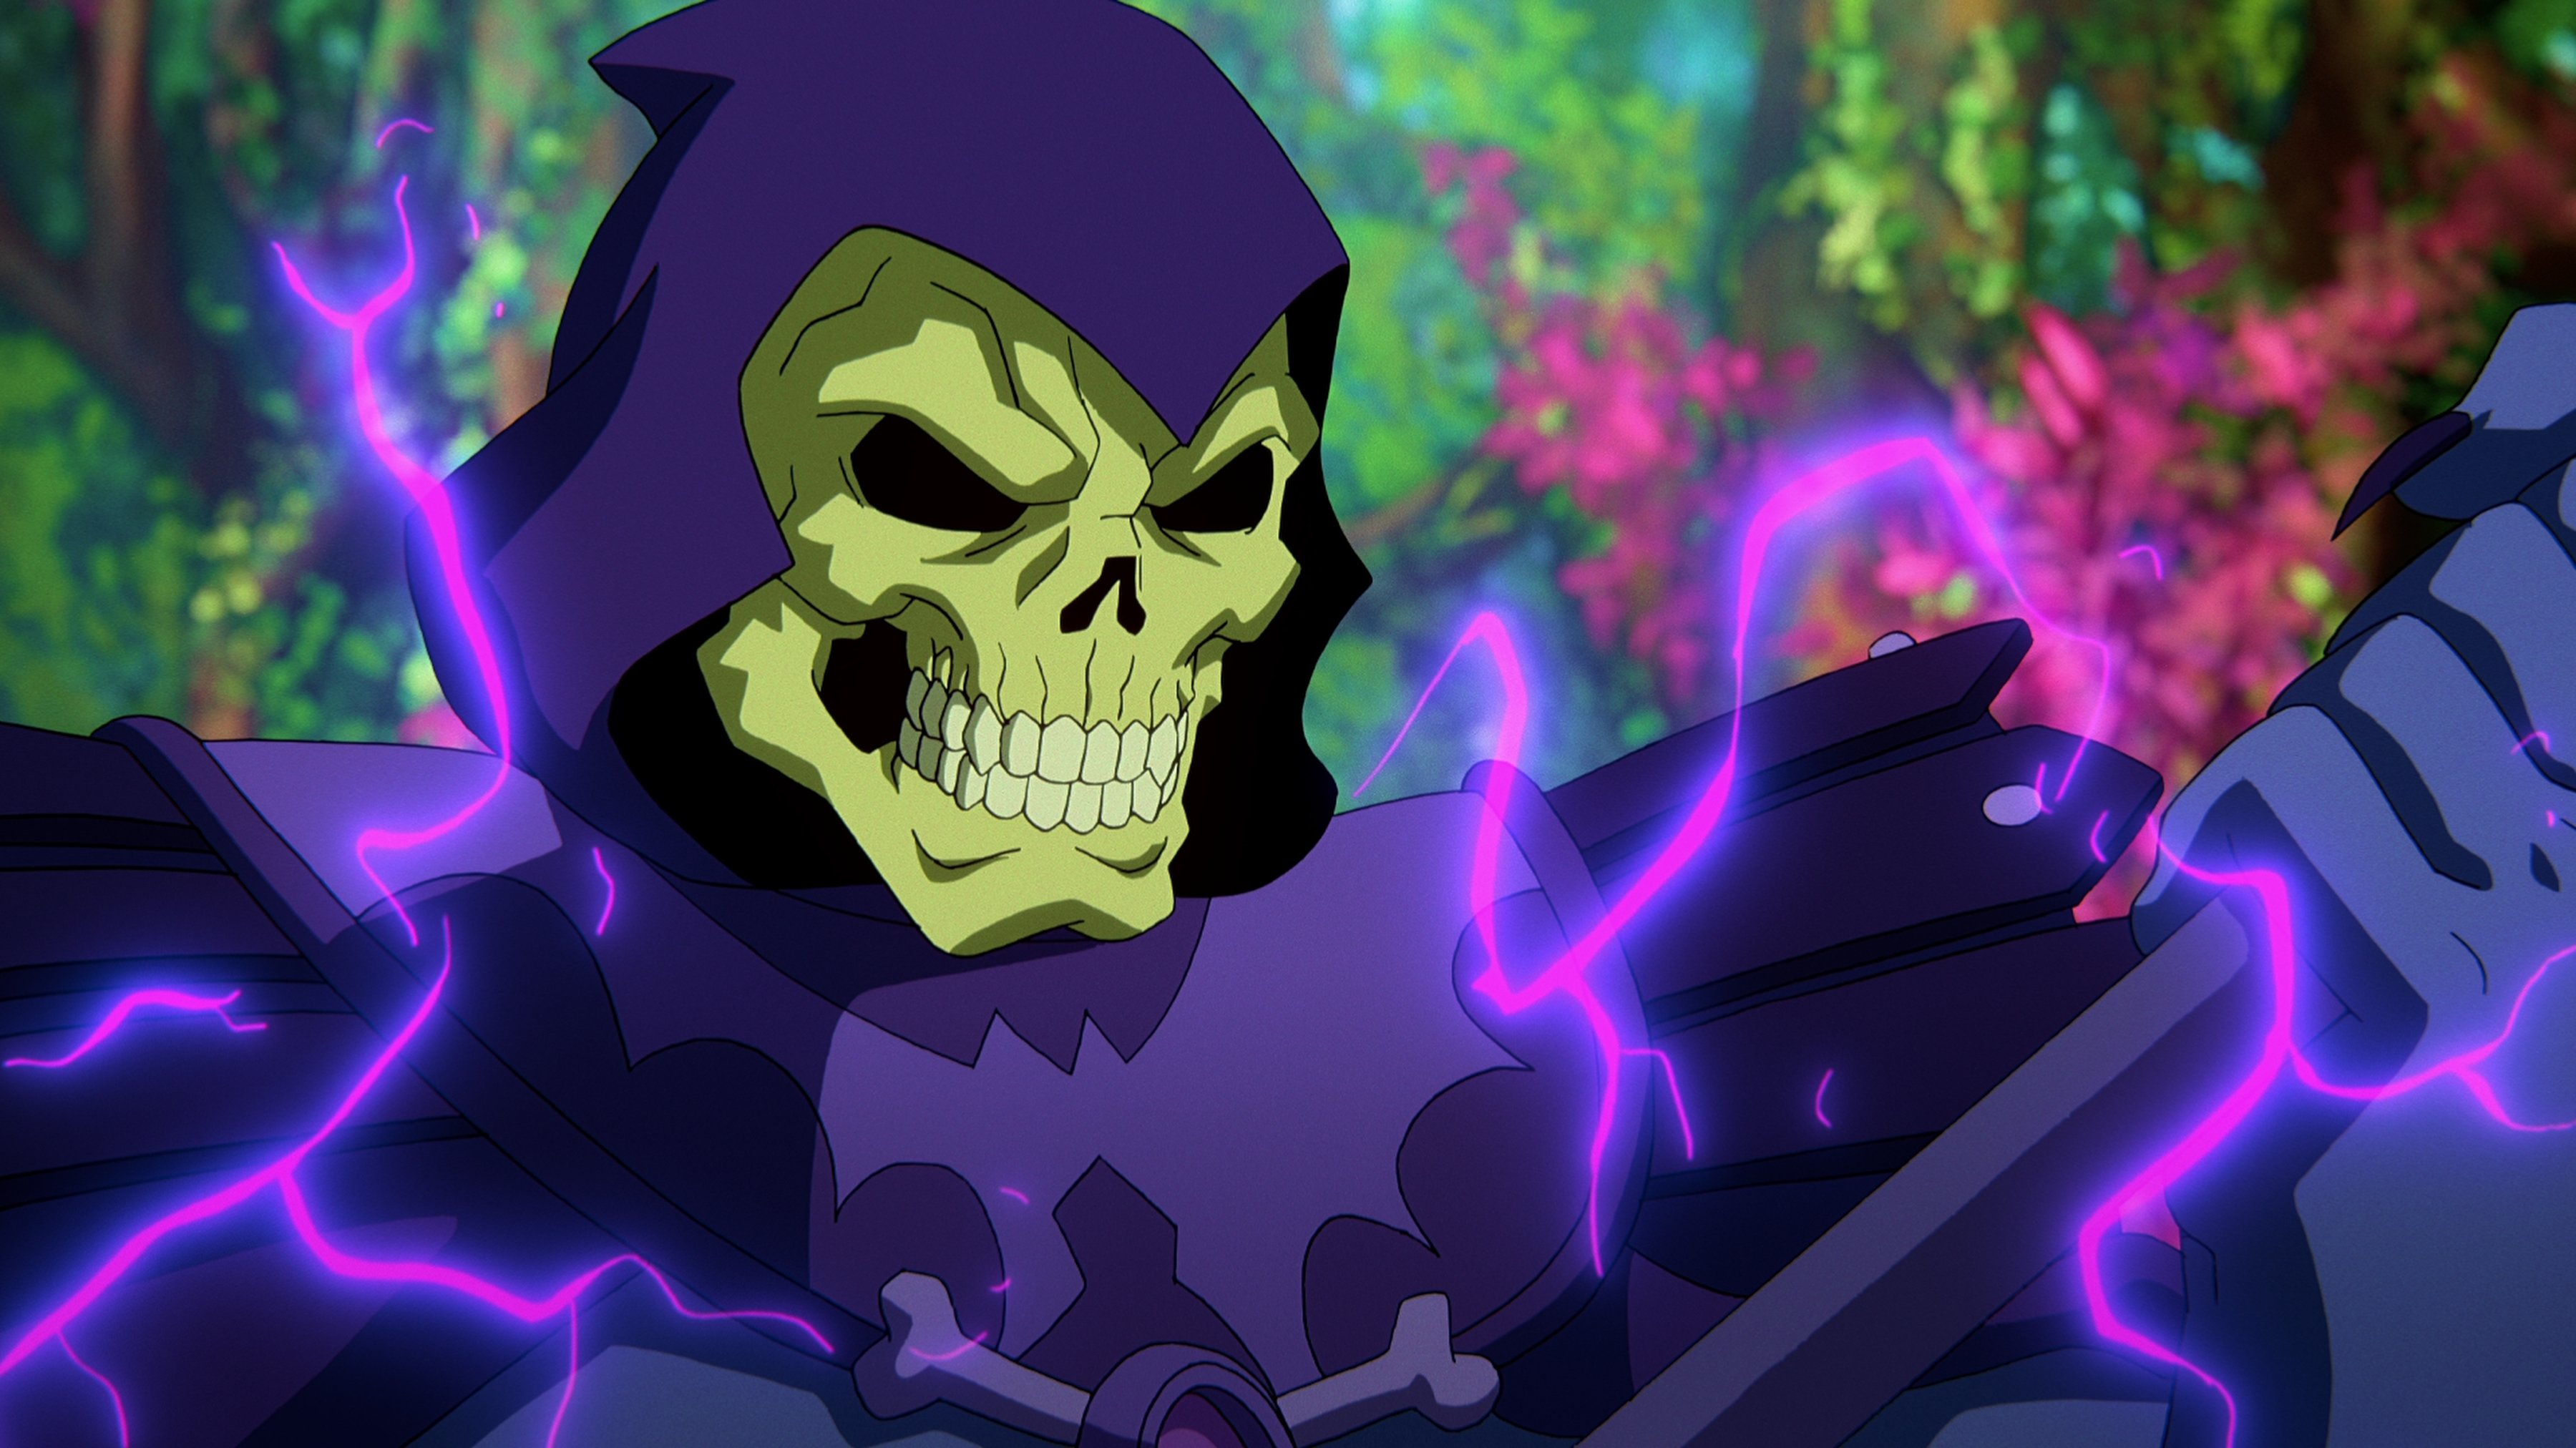 Masters of the Universe: Revelation - Skeletor weilds his magic staff